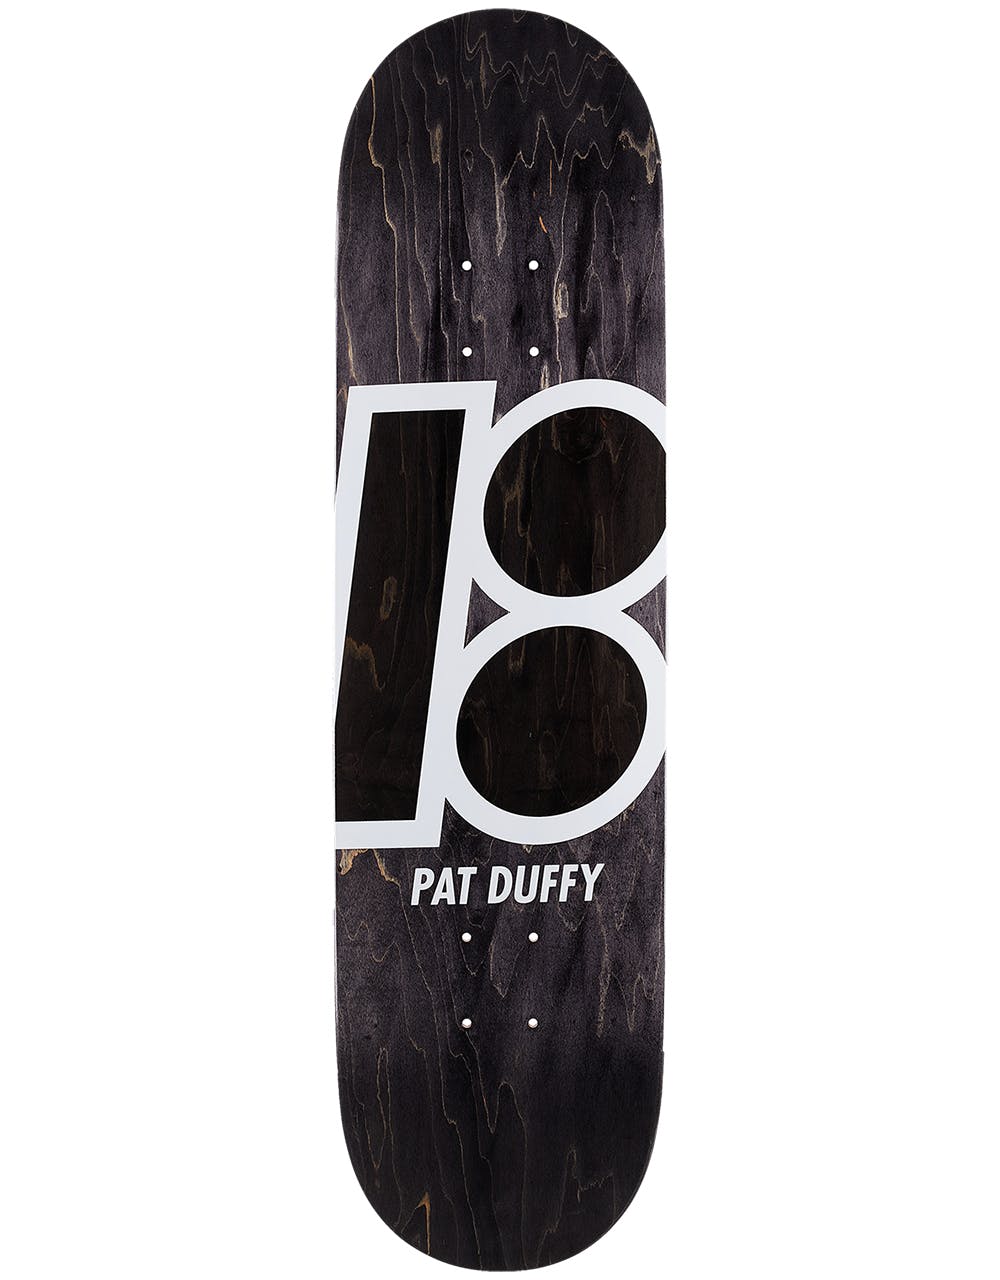 Plan B Duffy Stained Skateboard Deck - 8.375"